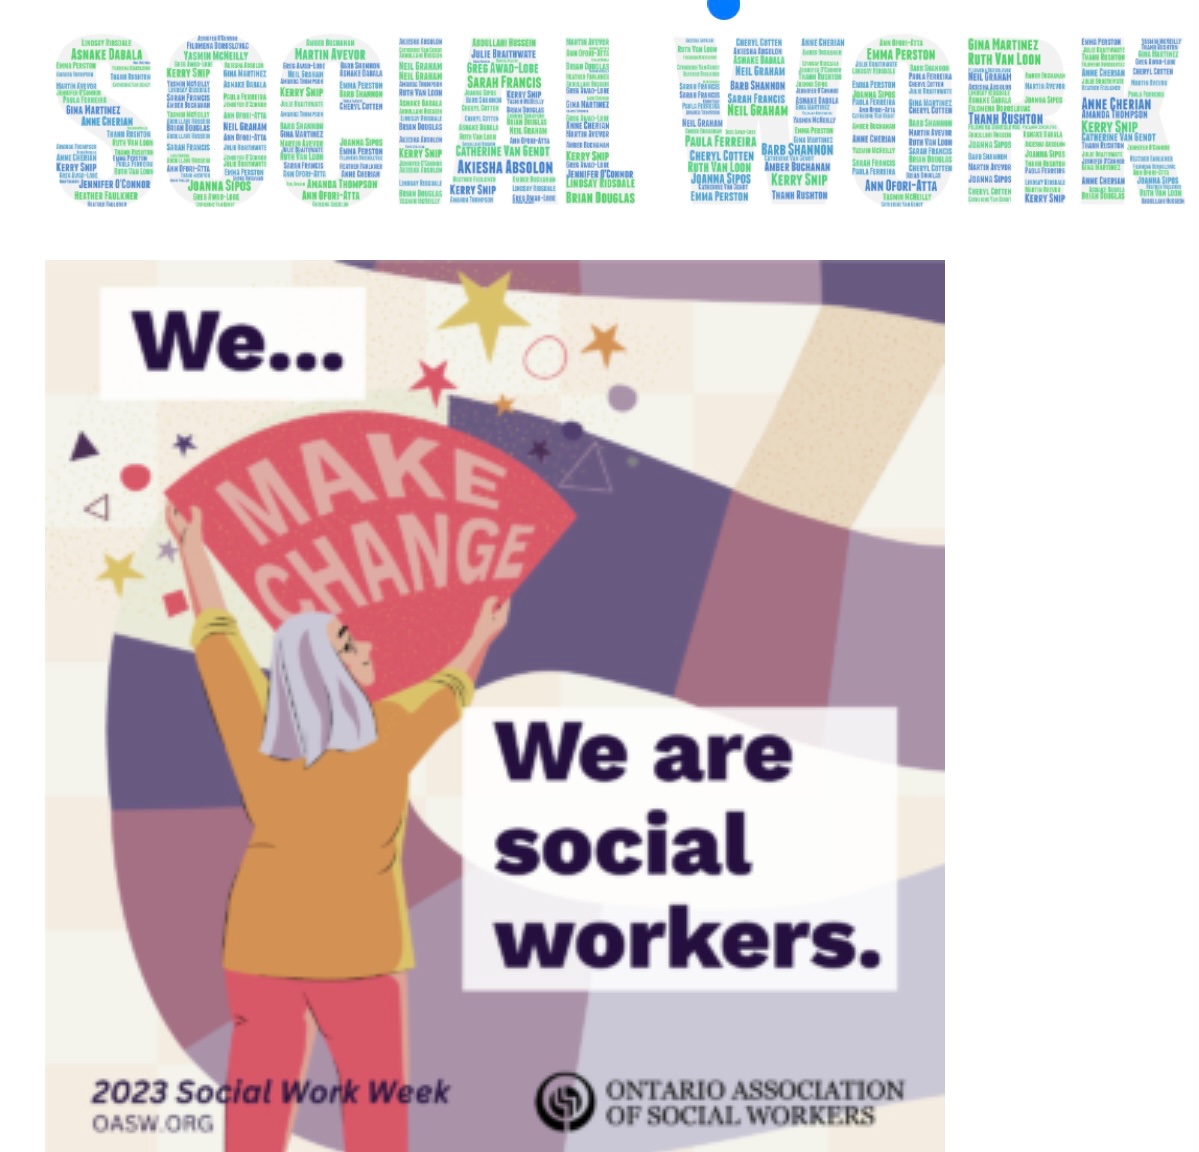 #SocialWorkWeek #socialworkWRDSB and #MoreThanEver when you post.
Thank you